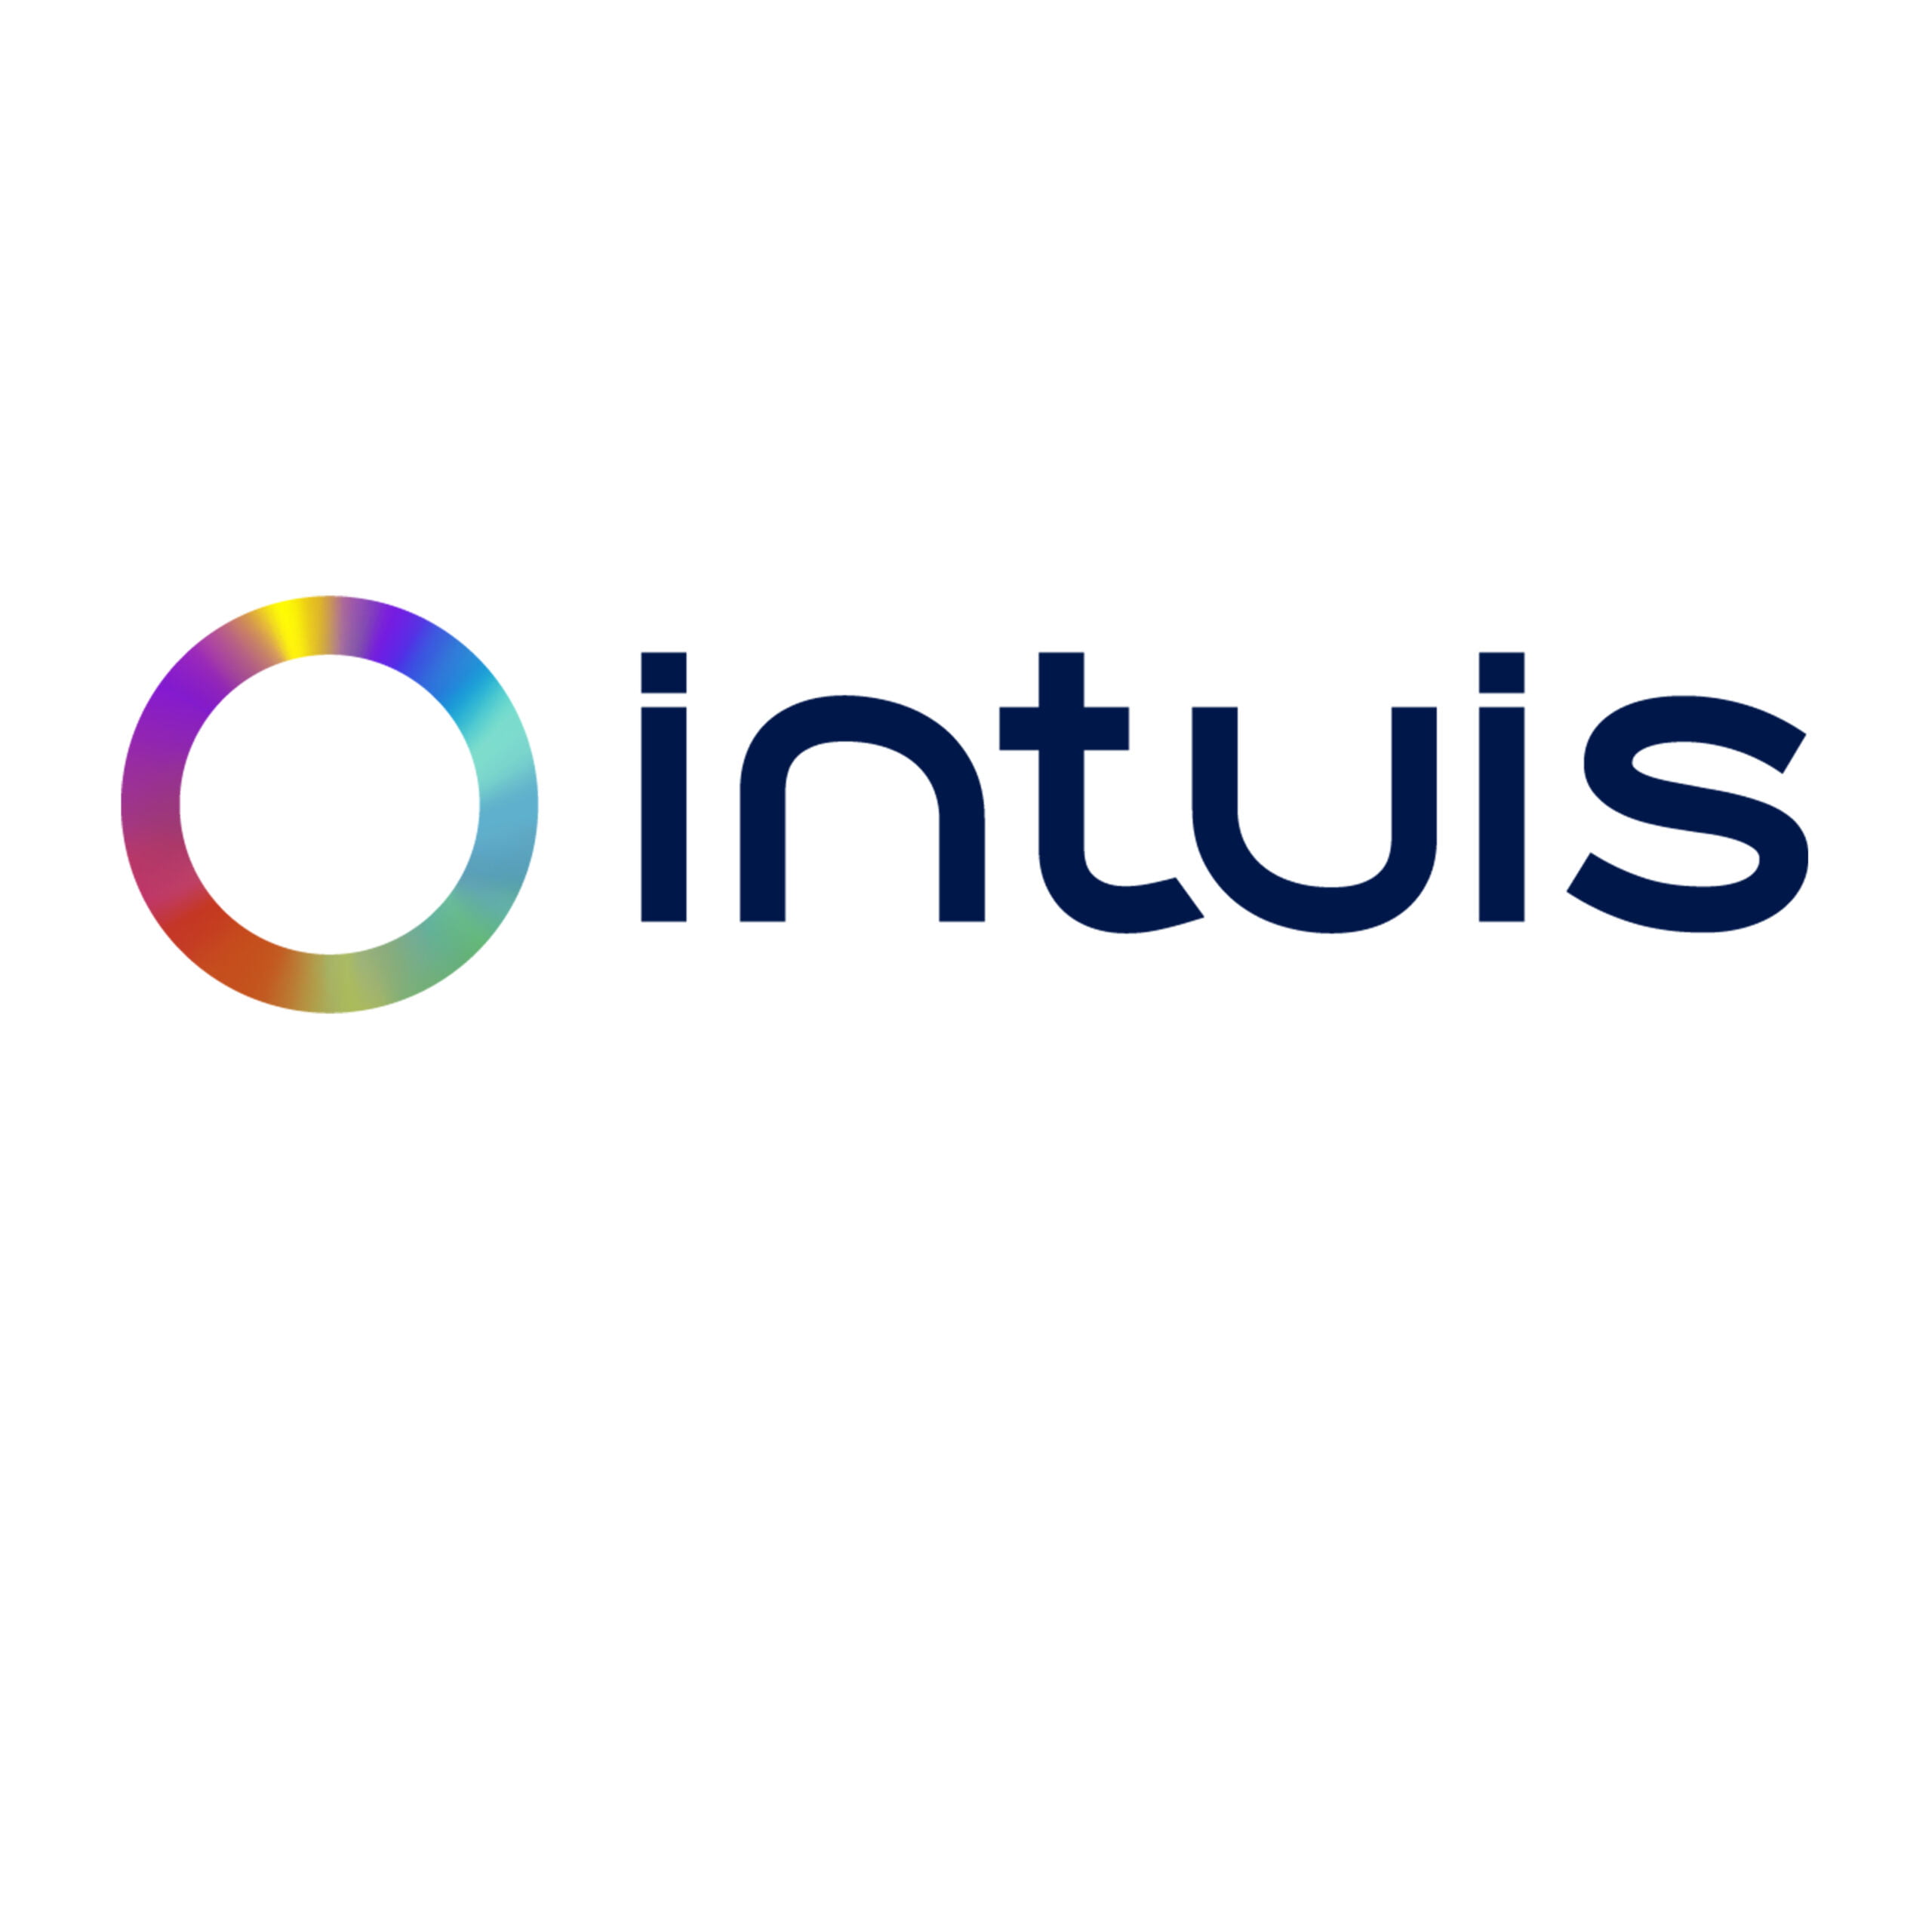 Intuis